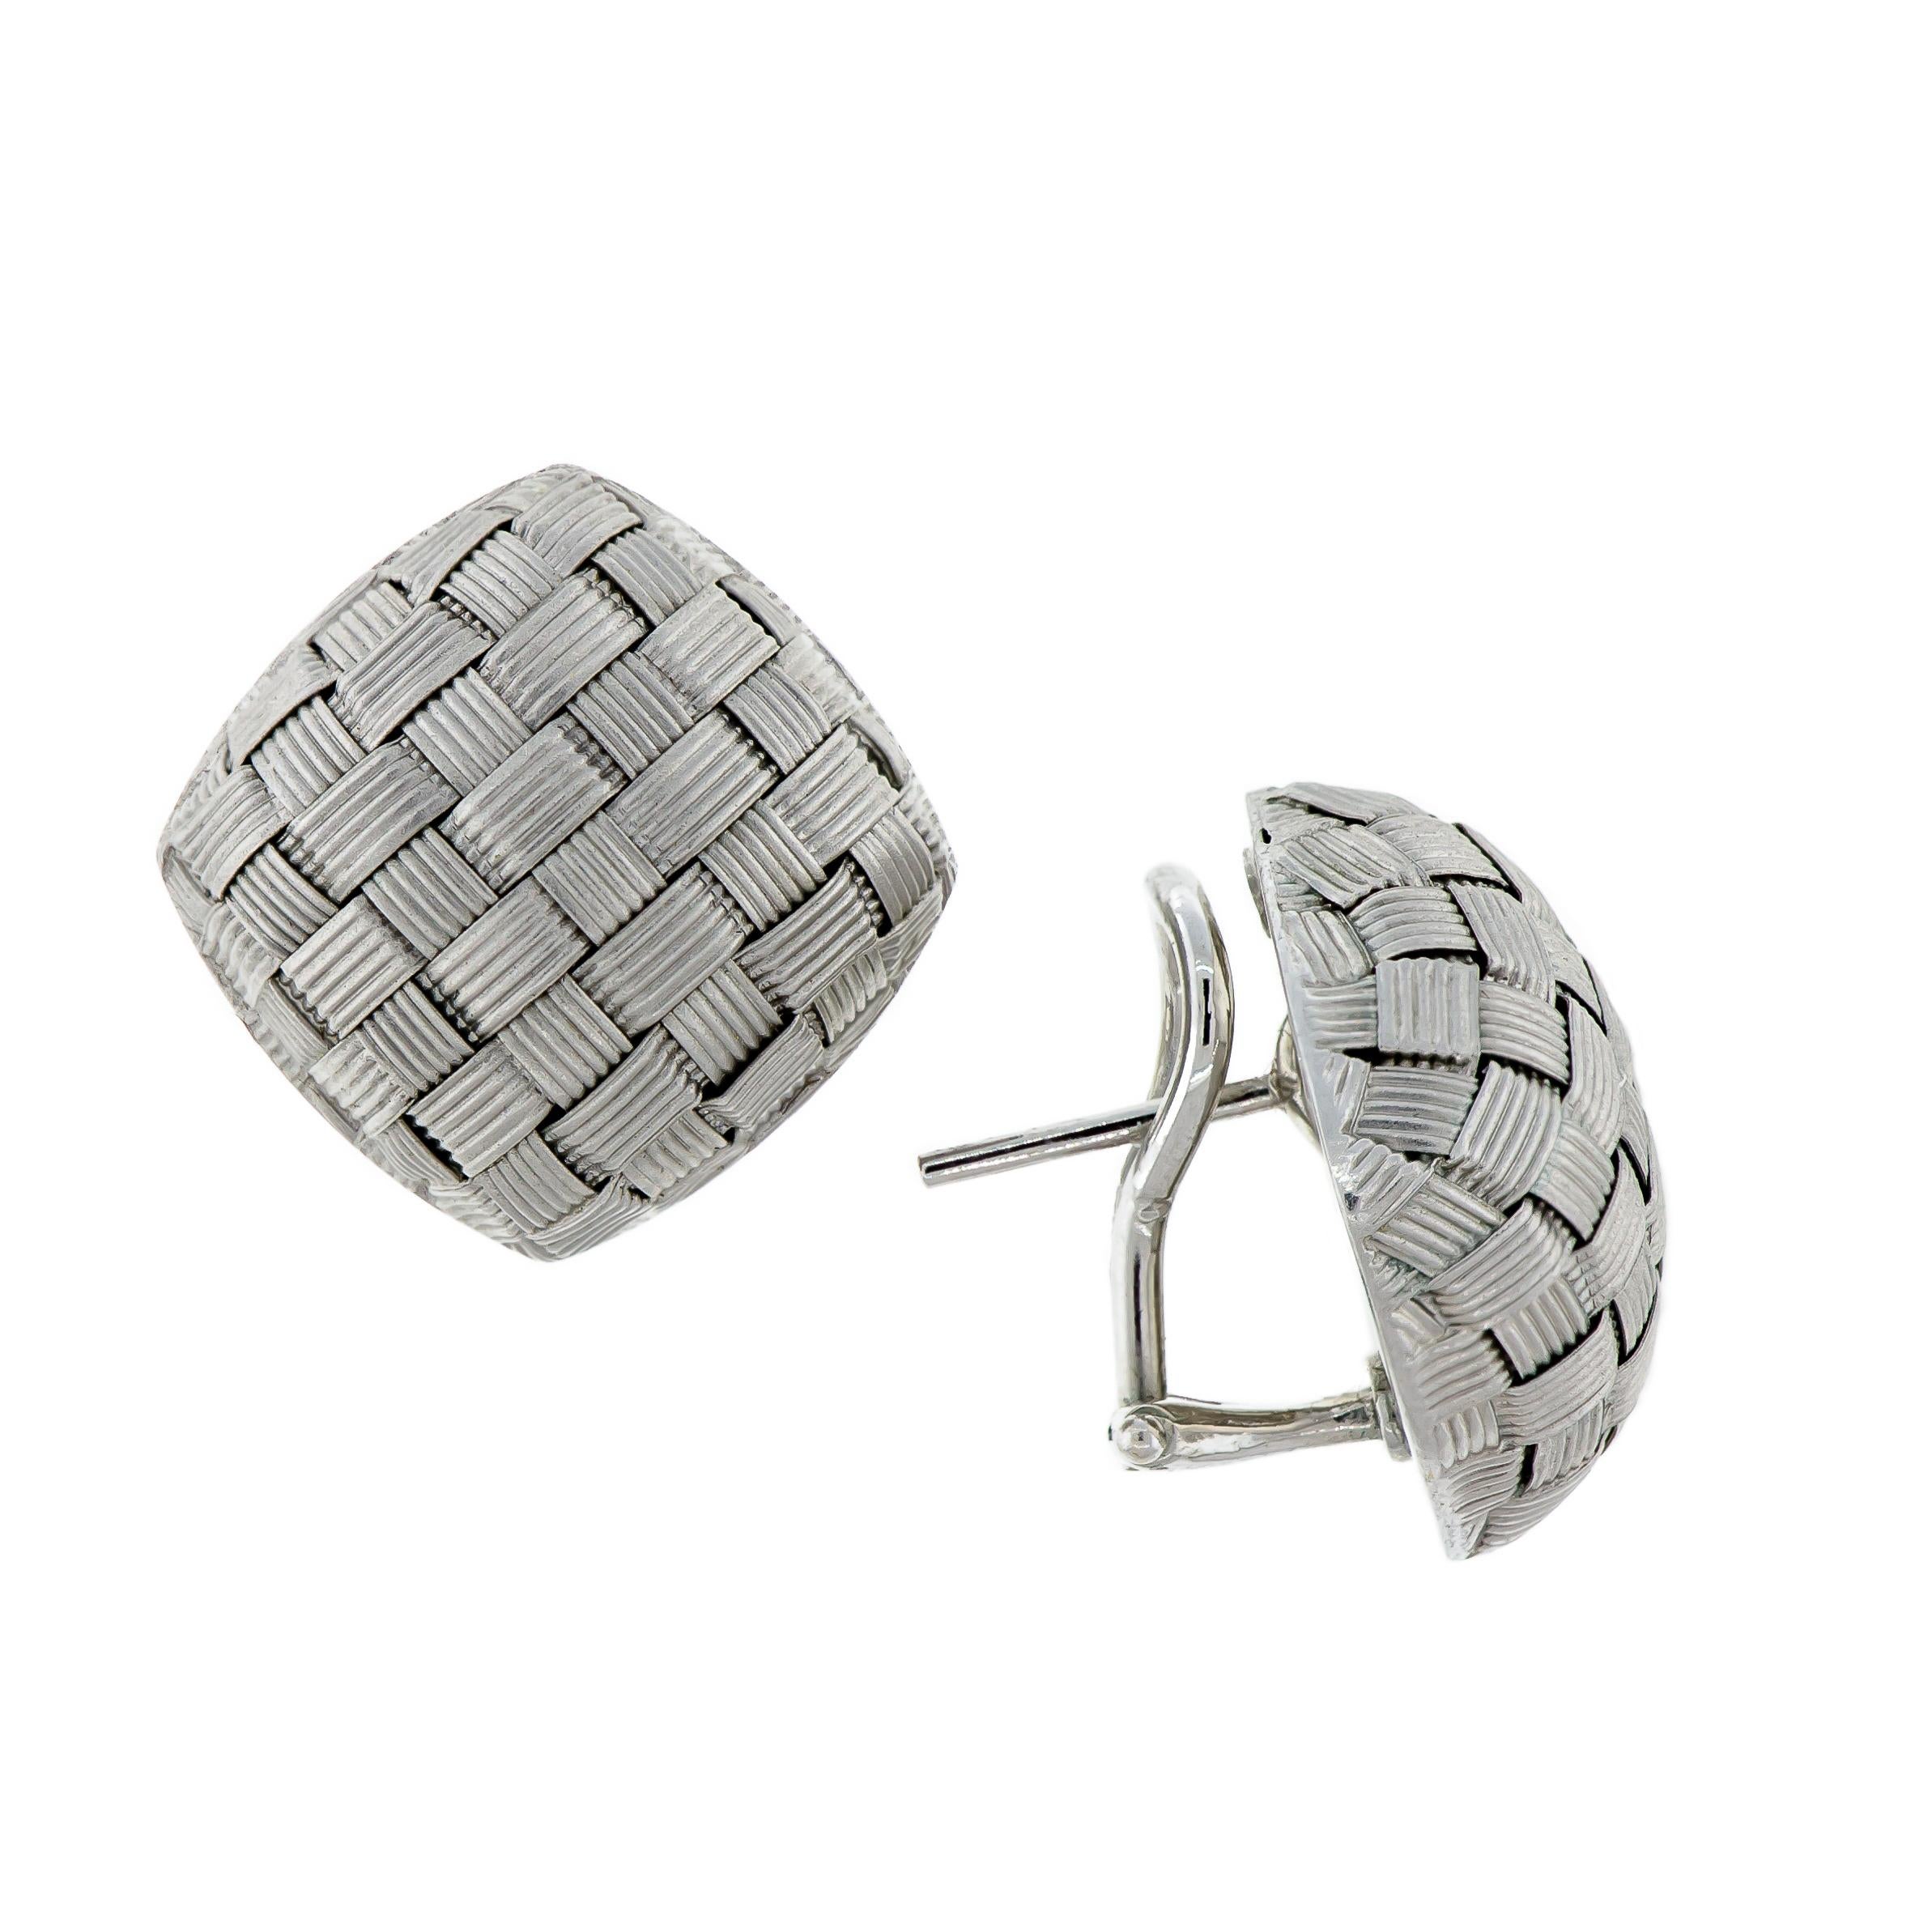 A striking pair of 18kt white gold Roberto Coin Appassionata Earclips. Decorated with a sophisticated basket-weave texture that embodies the domed surface of these square Italian earrings. Each one has a stamp on the reverse that sits under each